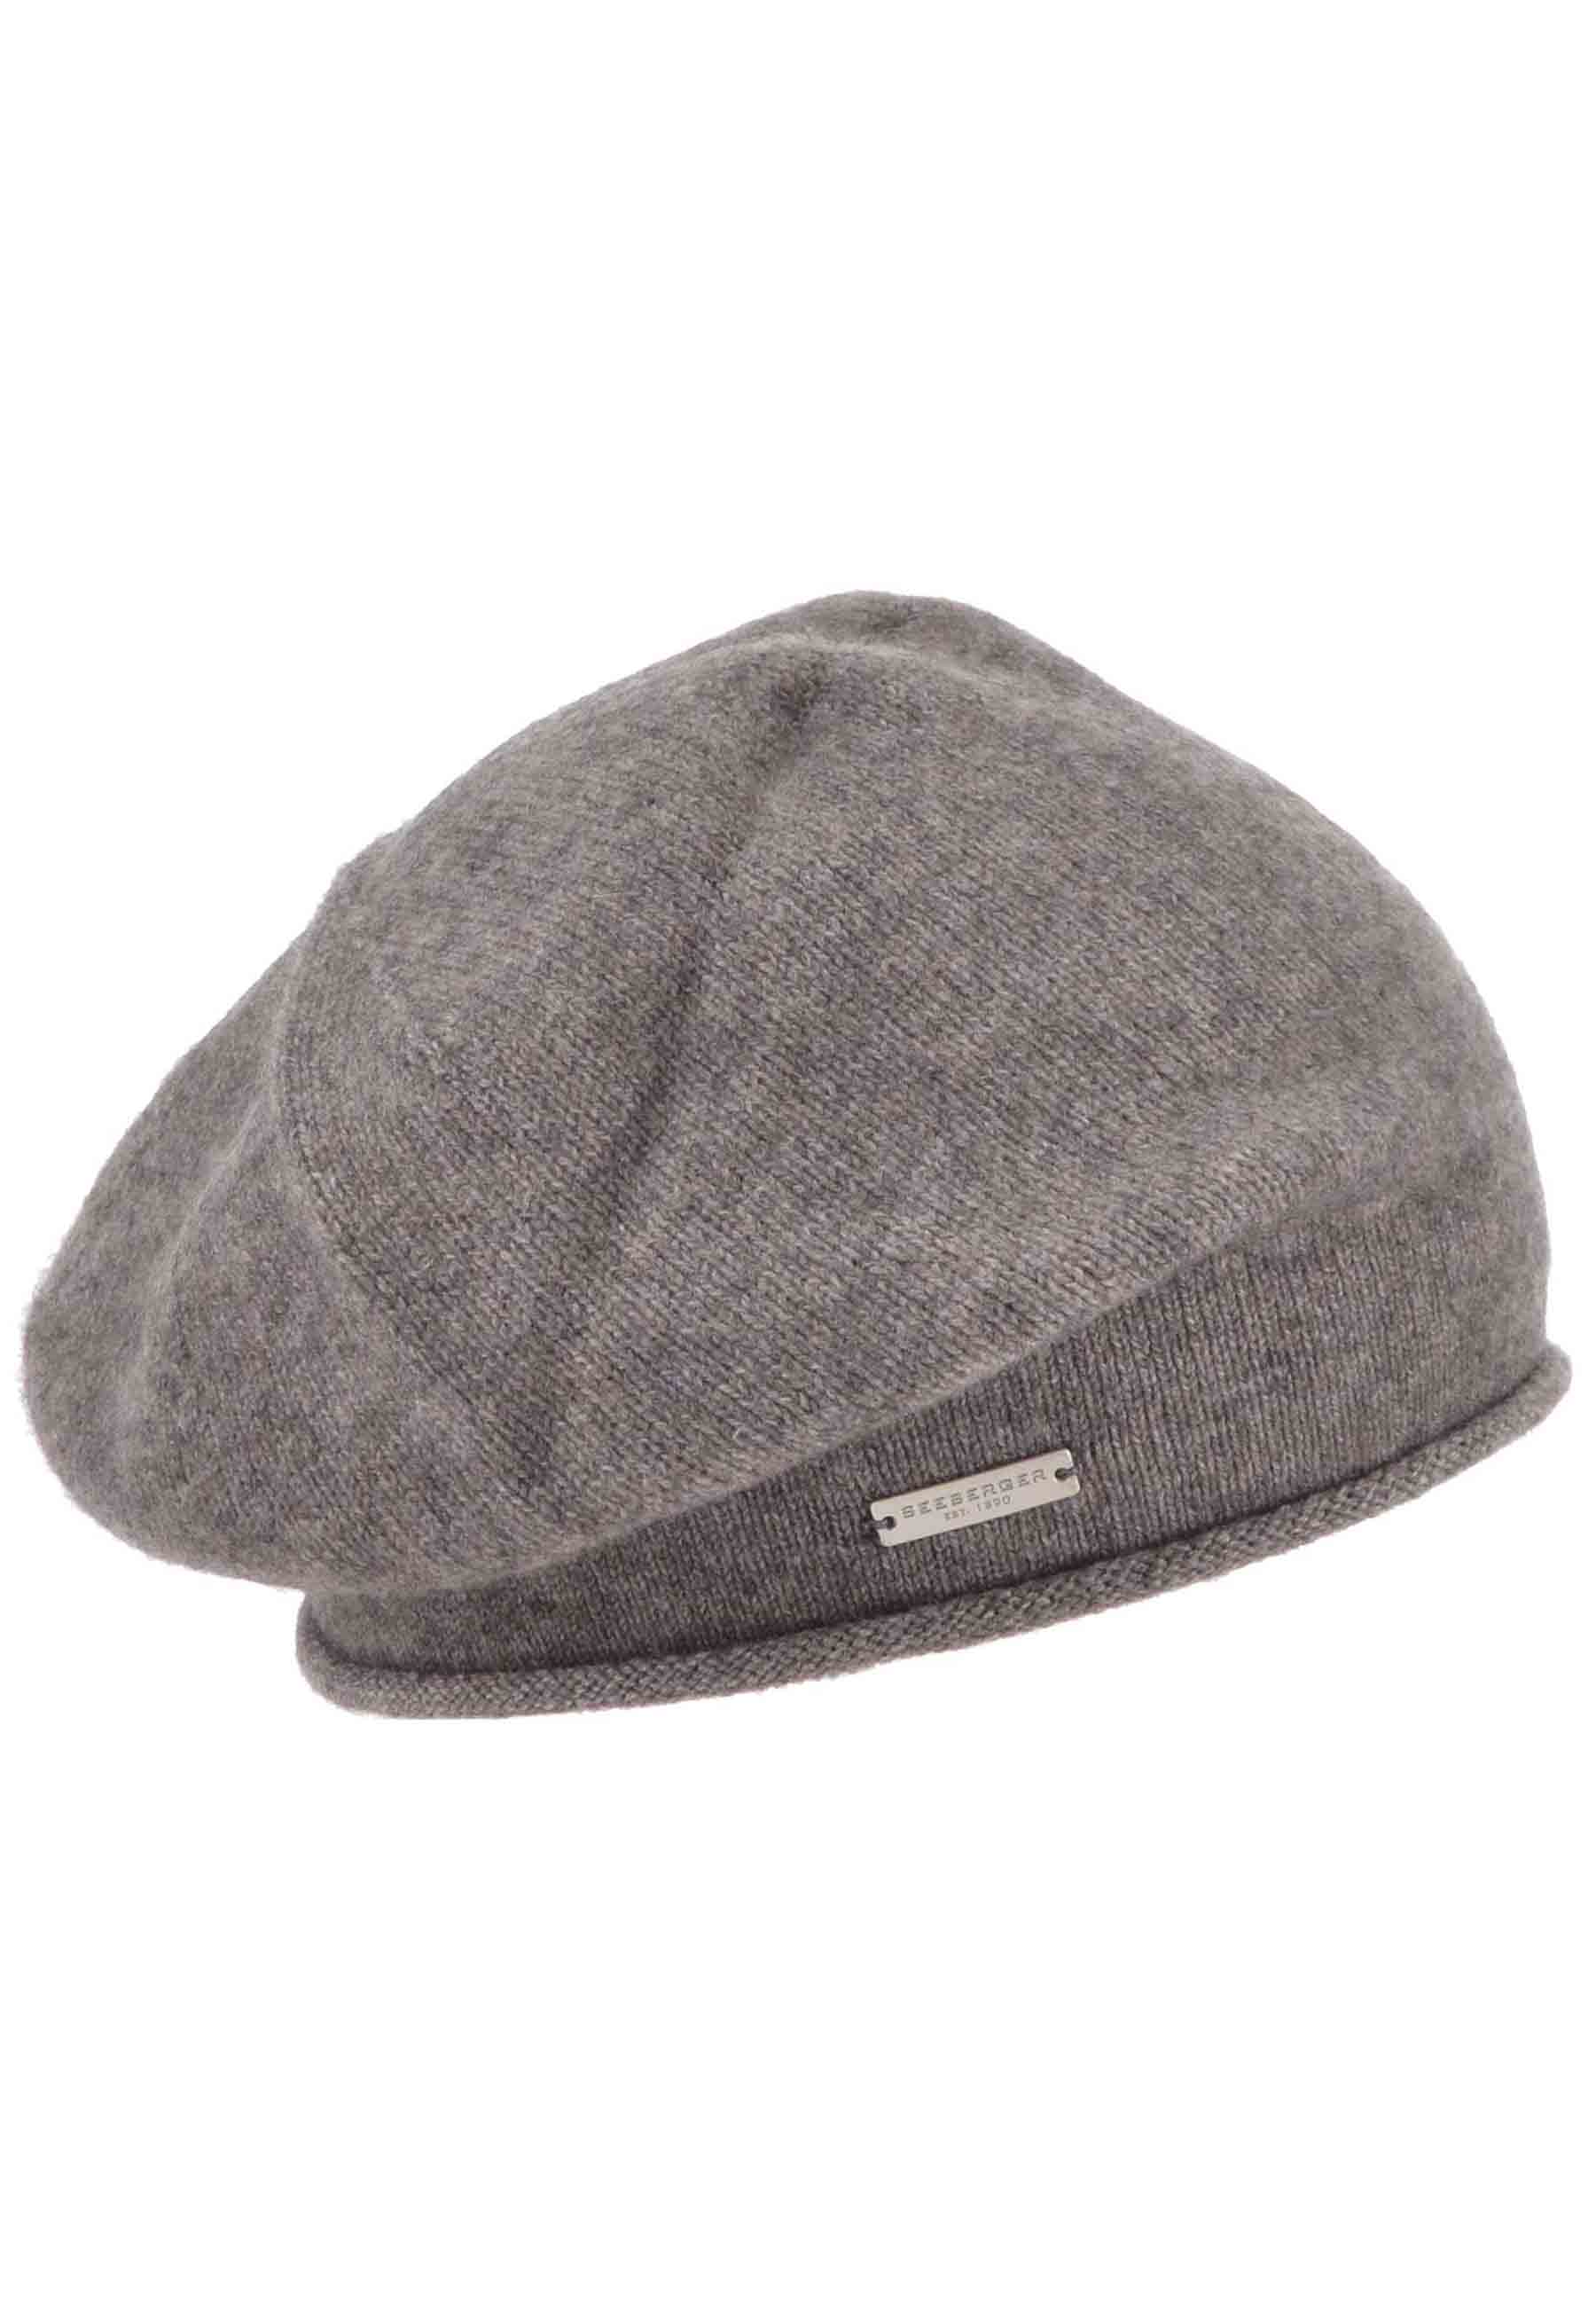 Women's hat in taupe cashmere with rolled edge